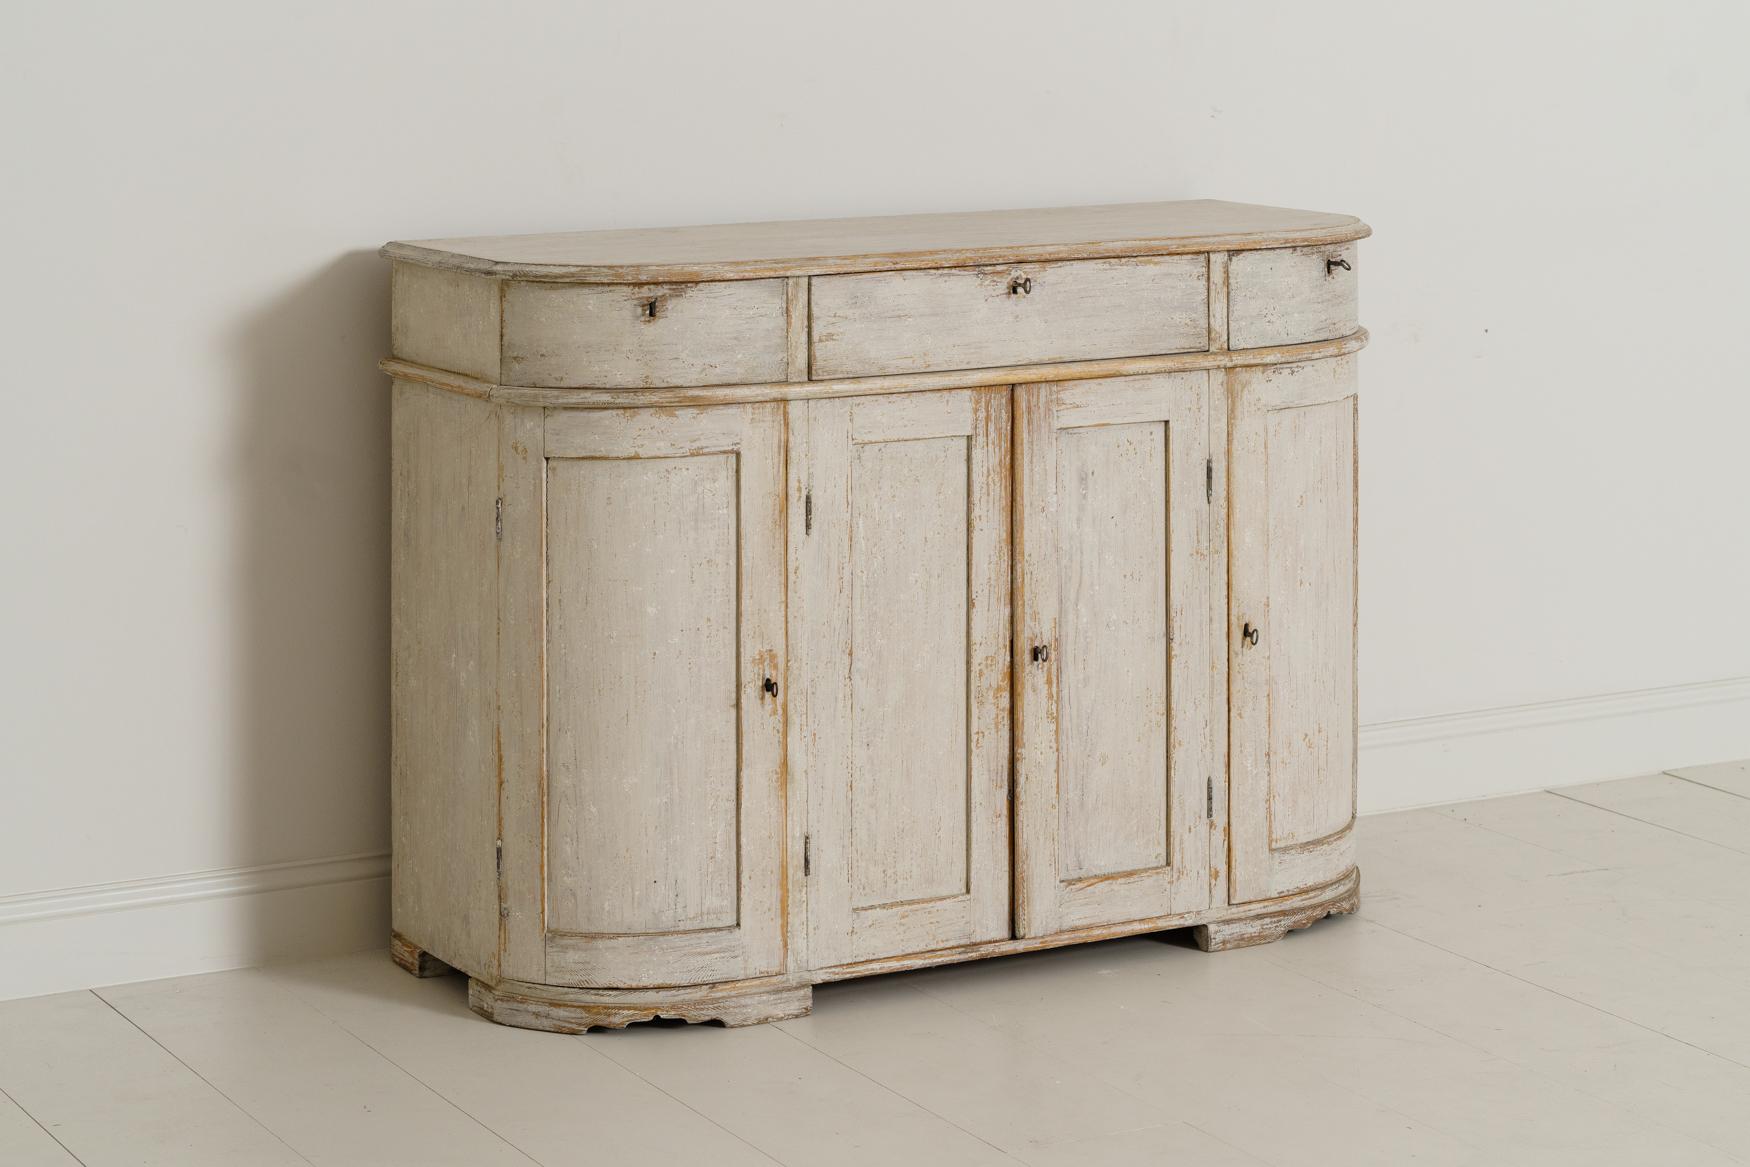 A Swedish demilune sideboard or server from the 19th century in the Gustavian style. The patina is a beautiful chalky old white with ivory undertones and wood showing through in areas. The buffet has three drawers and four doors. The centre section